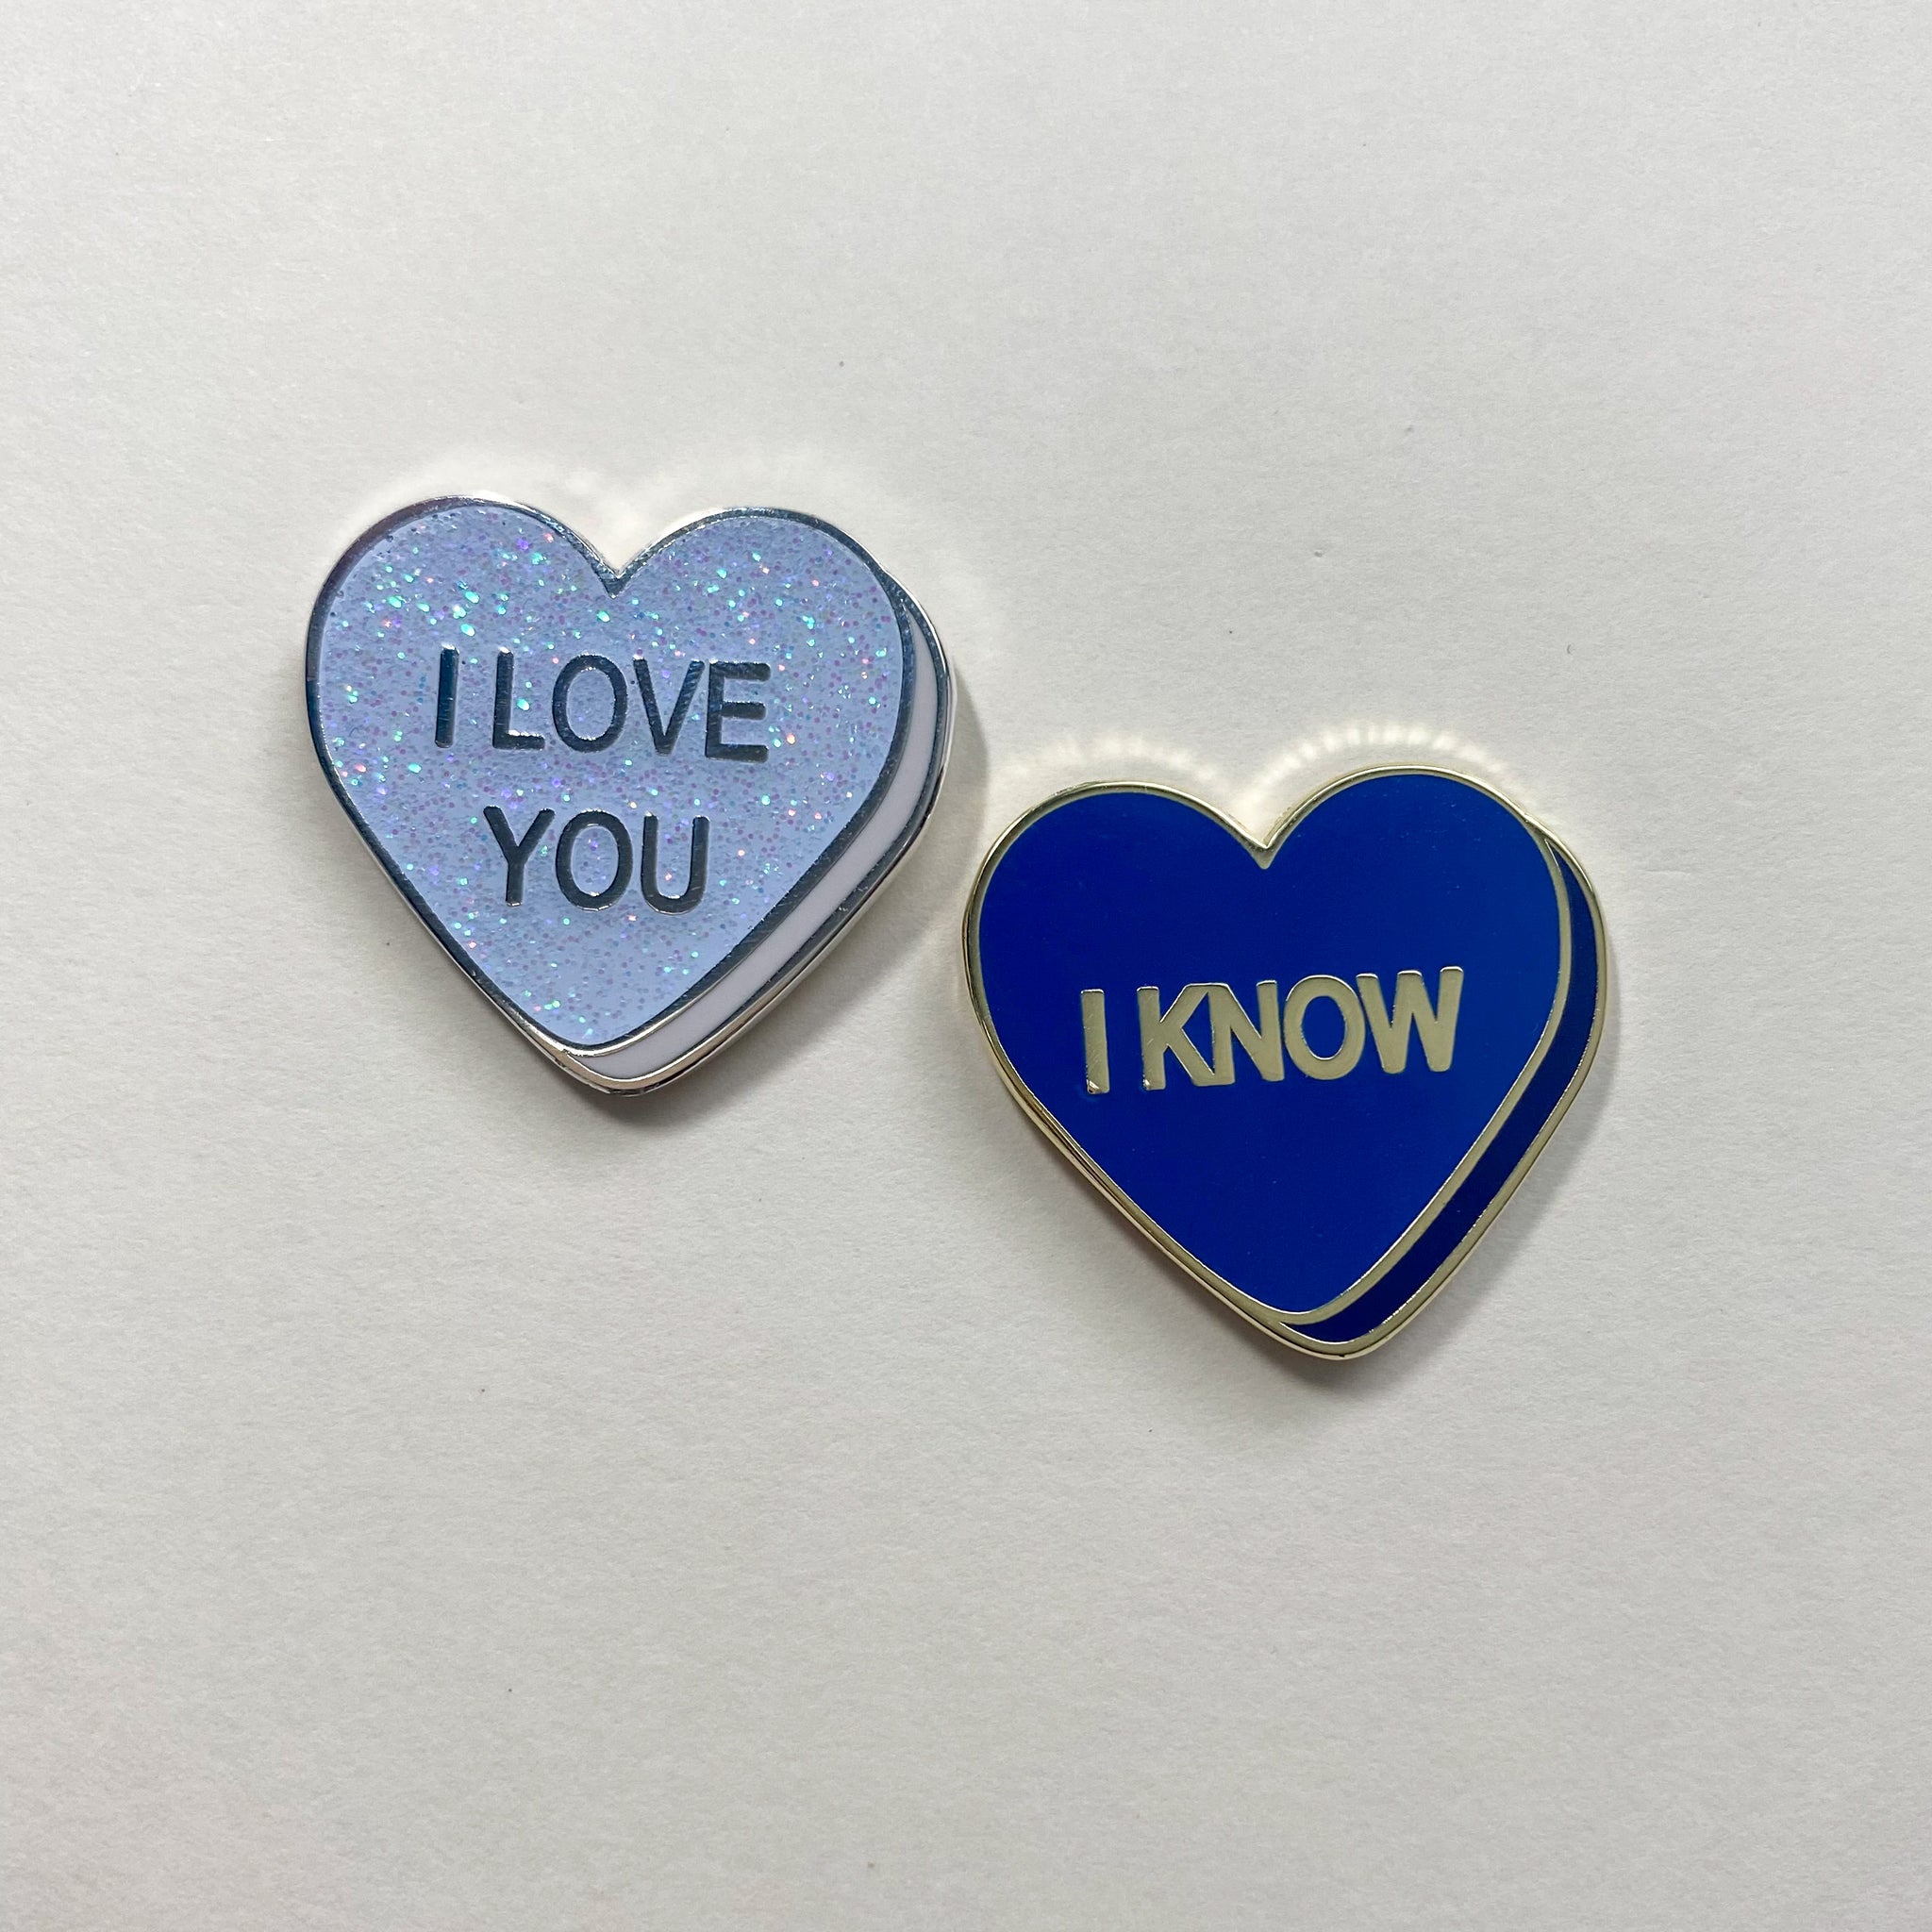 I Love You || I Know || Star Wars Inspired Conversation Heart Pins